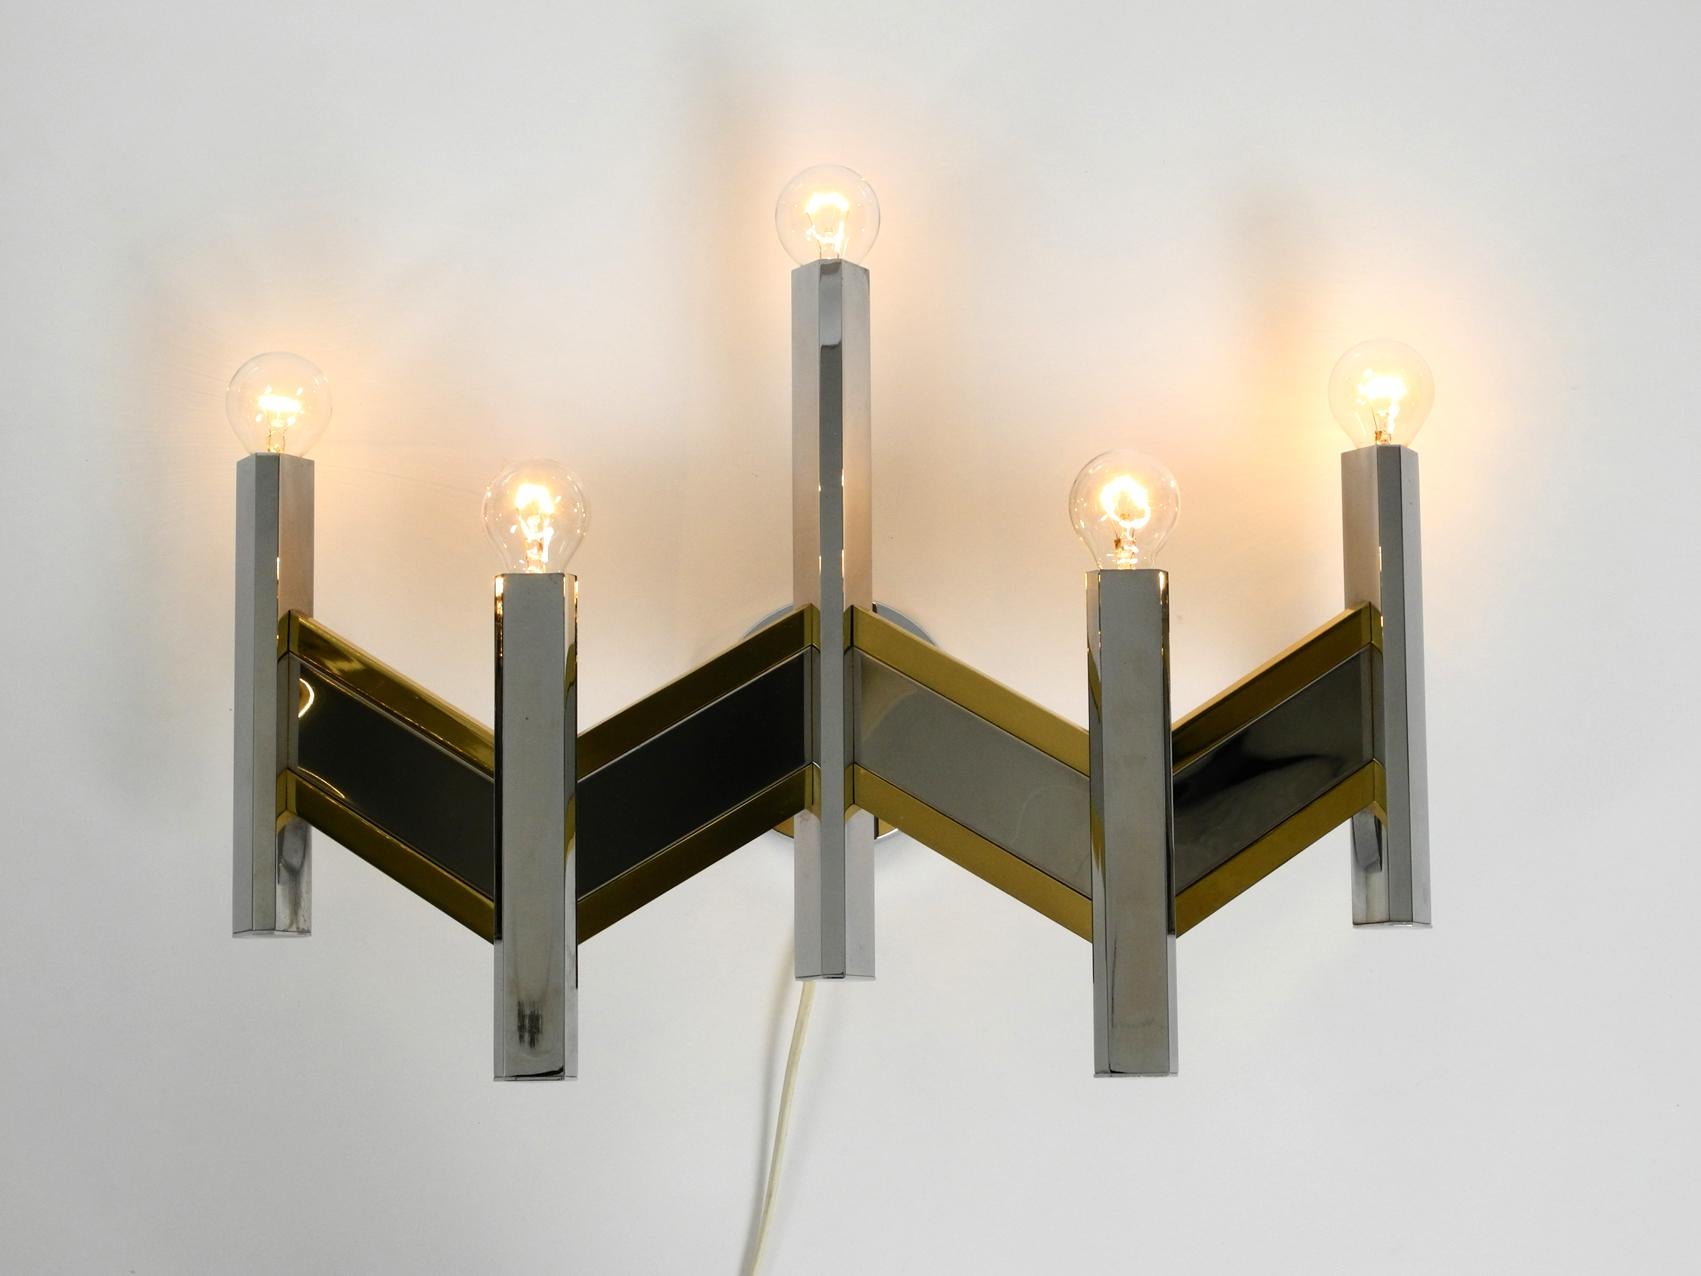 Beautiful 1970s 5-armed wall lamp by Gaetano Sciolari. Model 19009. Made in Italy. 
With original label. High glossy polished chrome and brass.
High quality minimalistic Sciolari design with many details. 
Very good vintage condition without